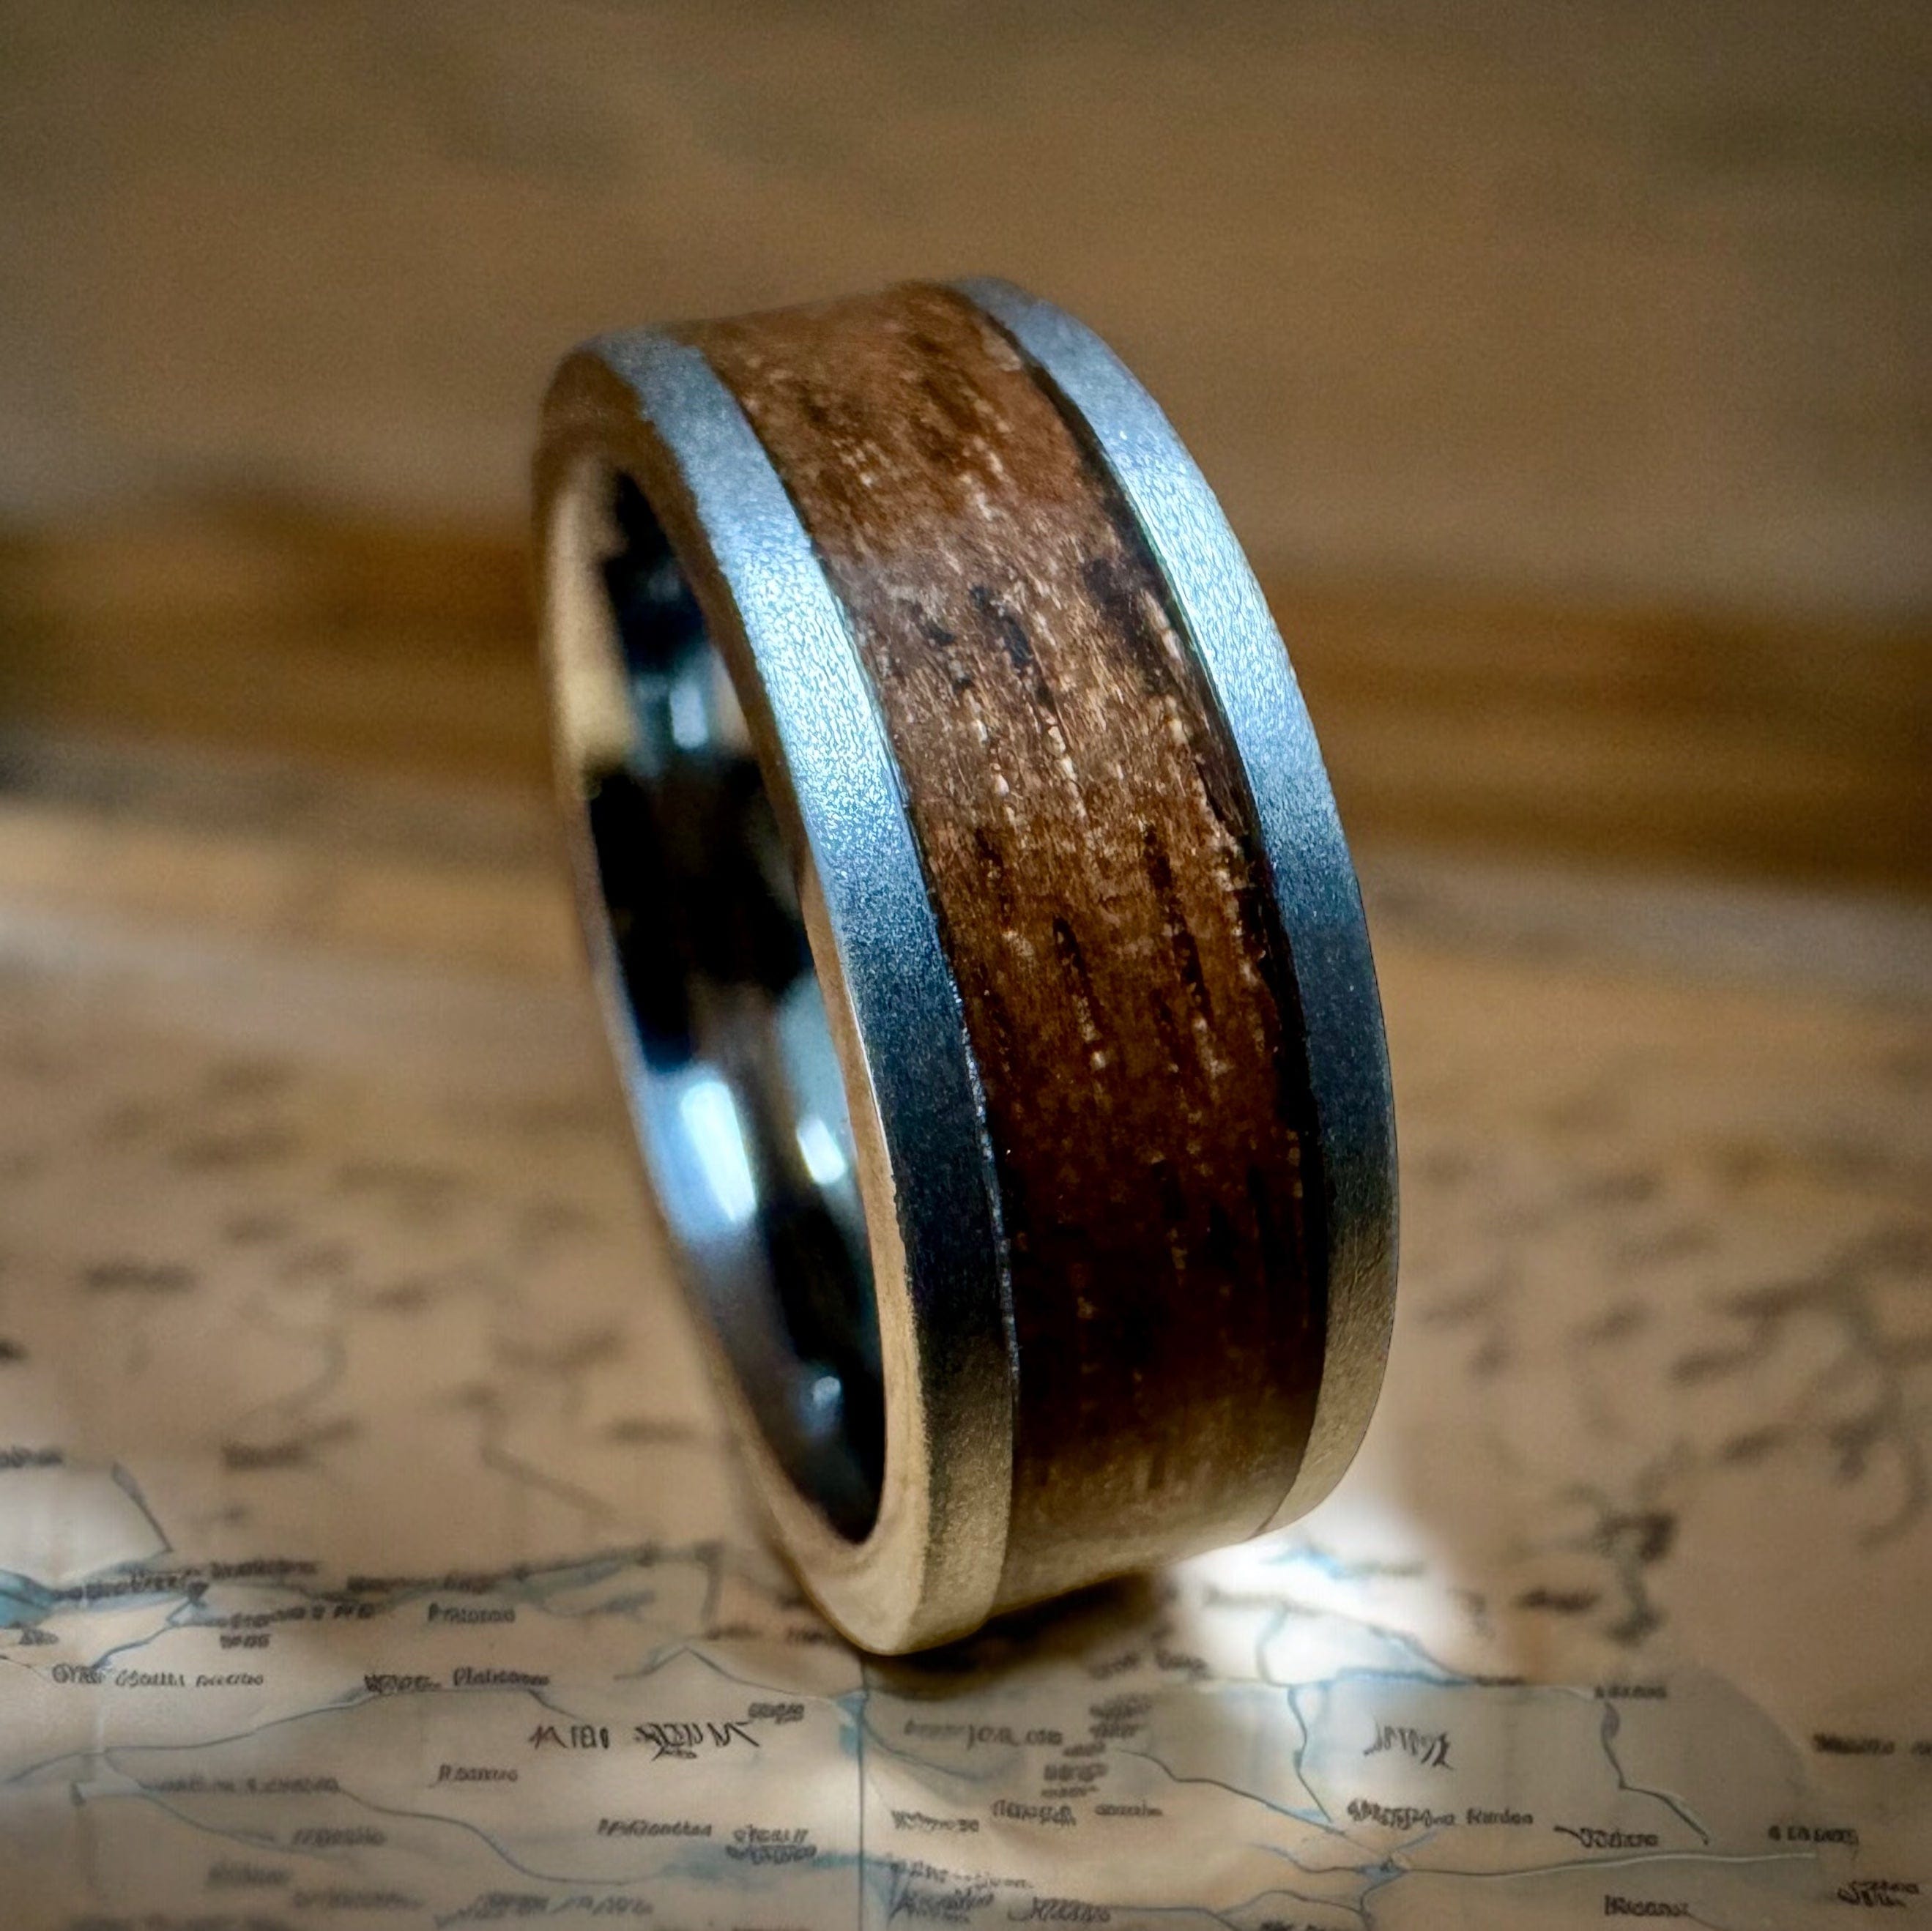 BW James Jewelers ALT Wedding Band “The Major” 100% USA Made Ring With Wood From A M1 Garand Tungsten Ring